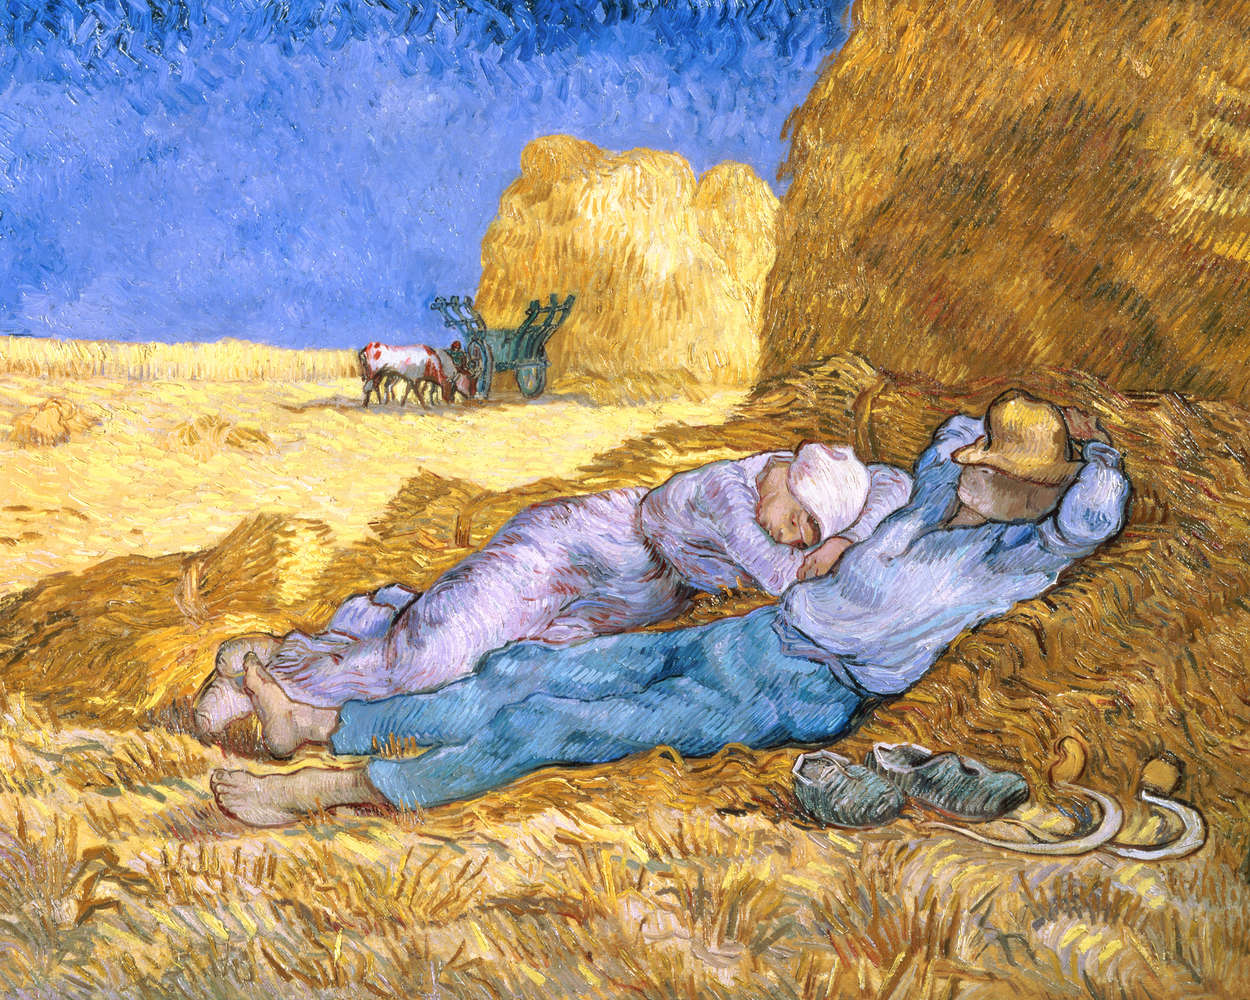             Photo wallpaper "The siesta after Millet" by Vincent van Gogh
        